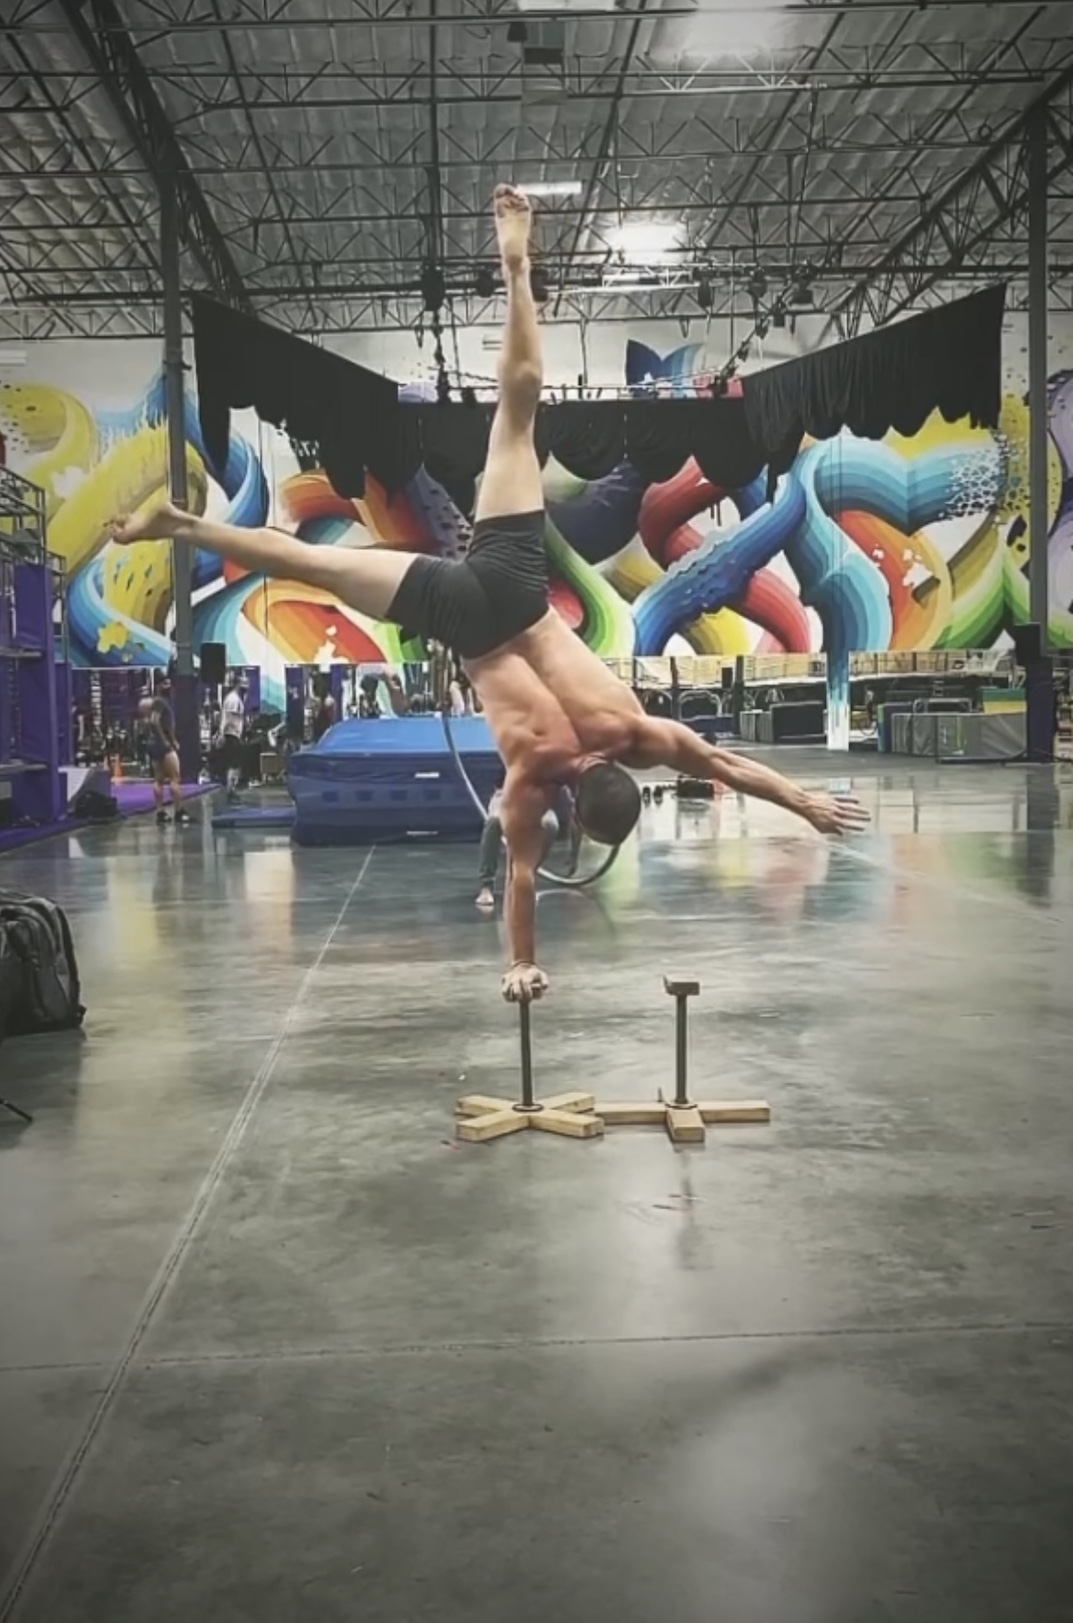 One-handed handstand